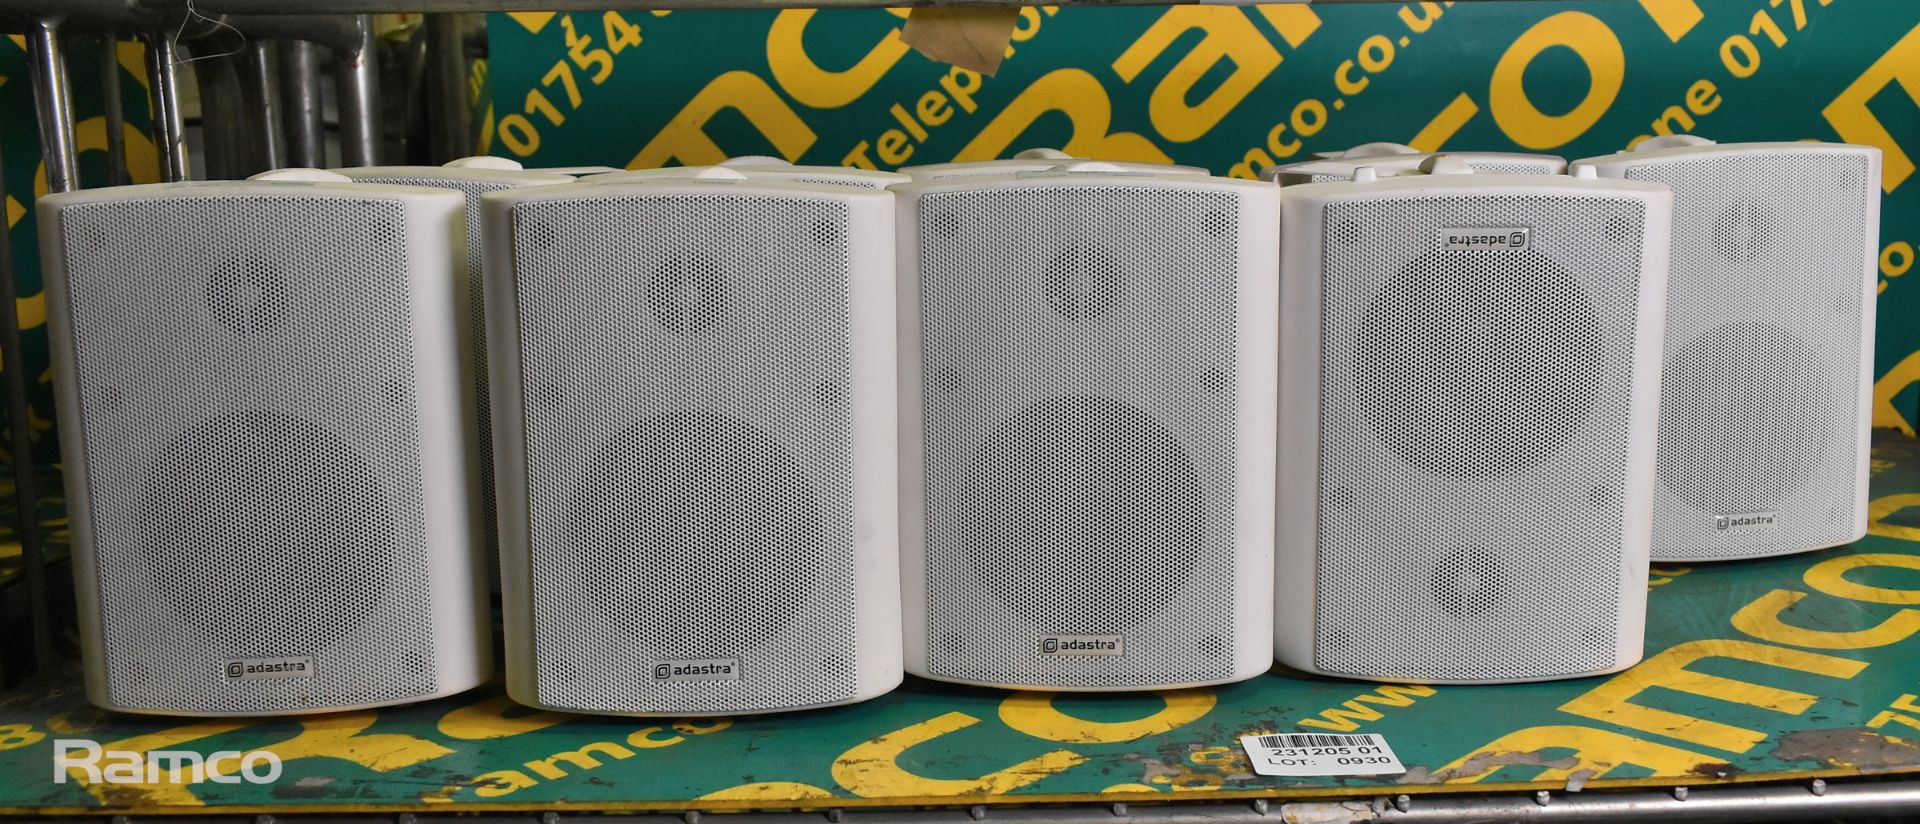 10x Loctite SF 7386 multi bond activator, 3x pairs of Adastra wall mount speakers - Image 3 of 12